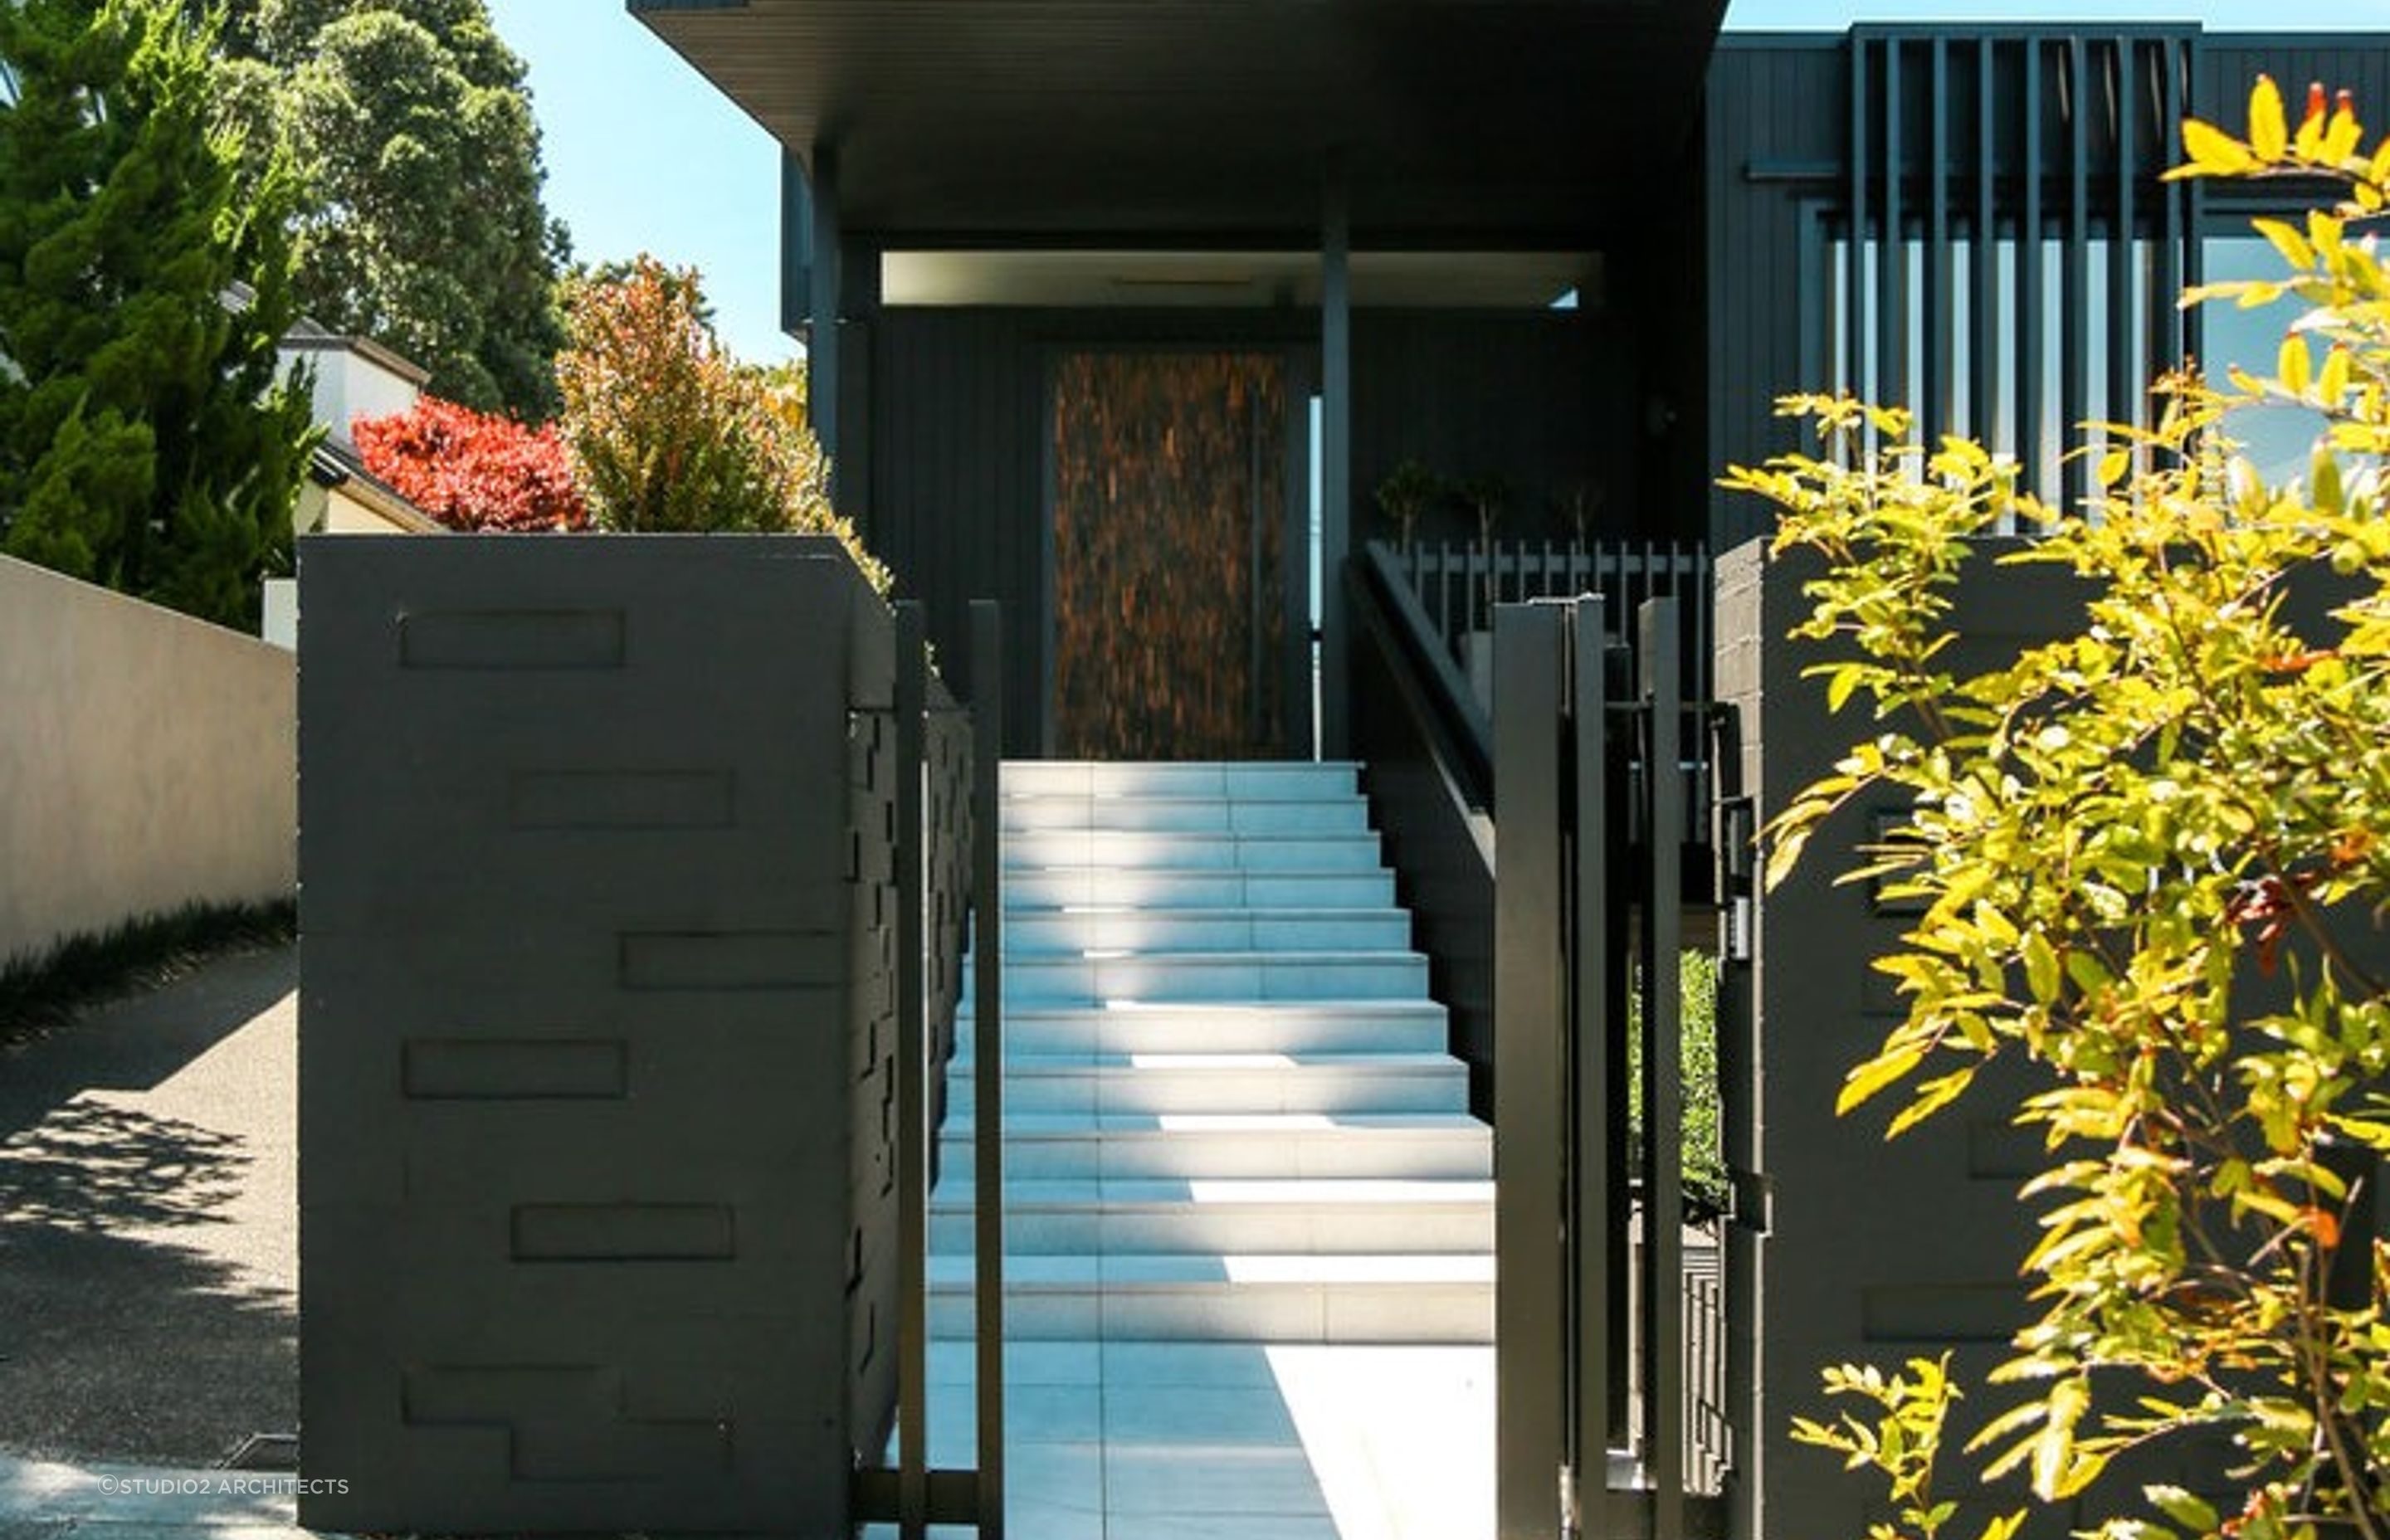 A unique find with the patterned door of this superbly renovated home in Remuera